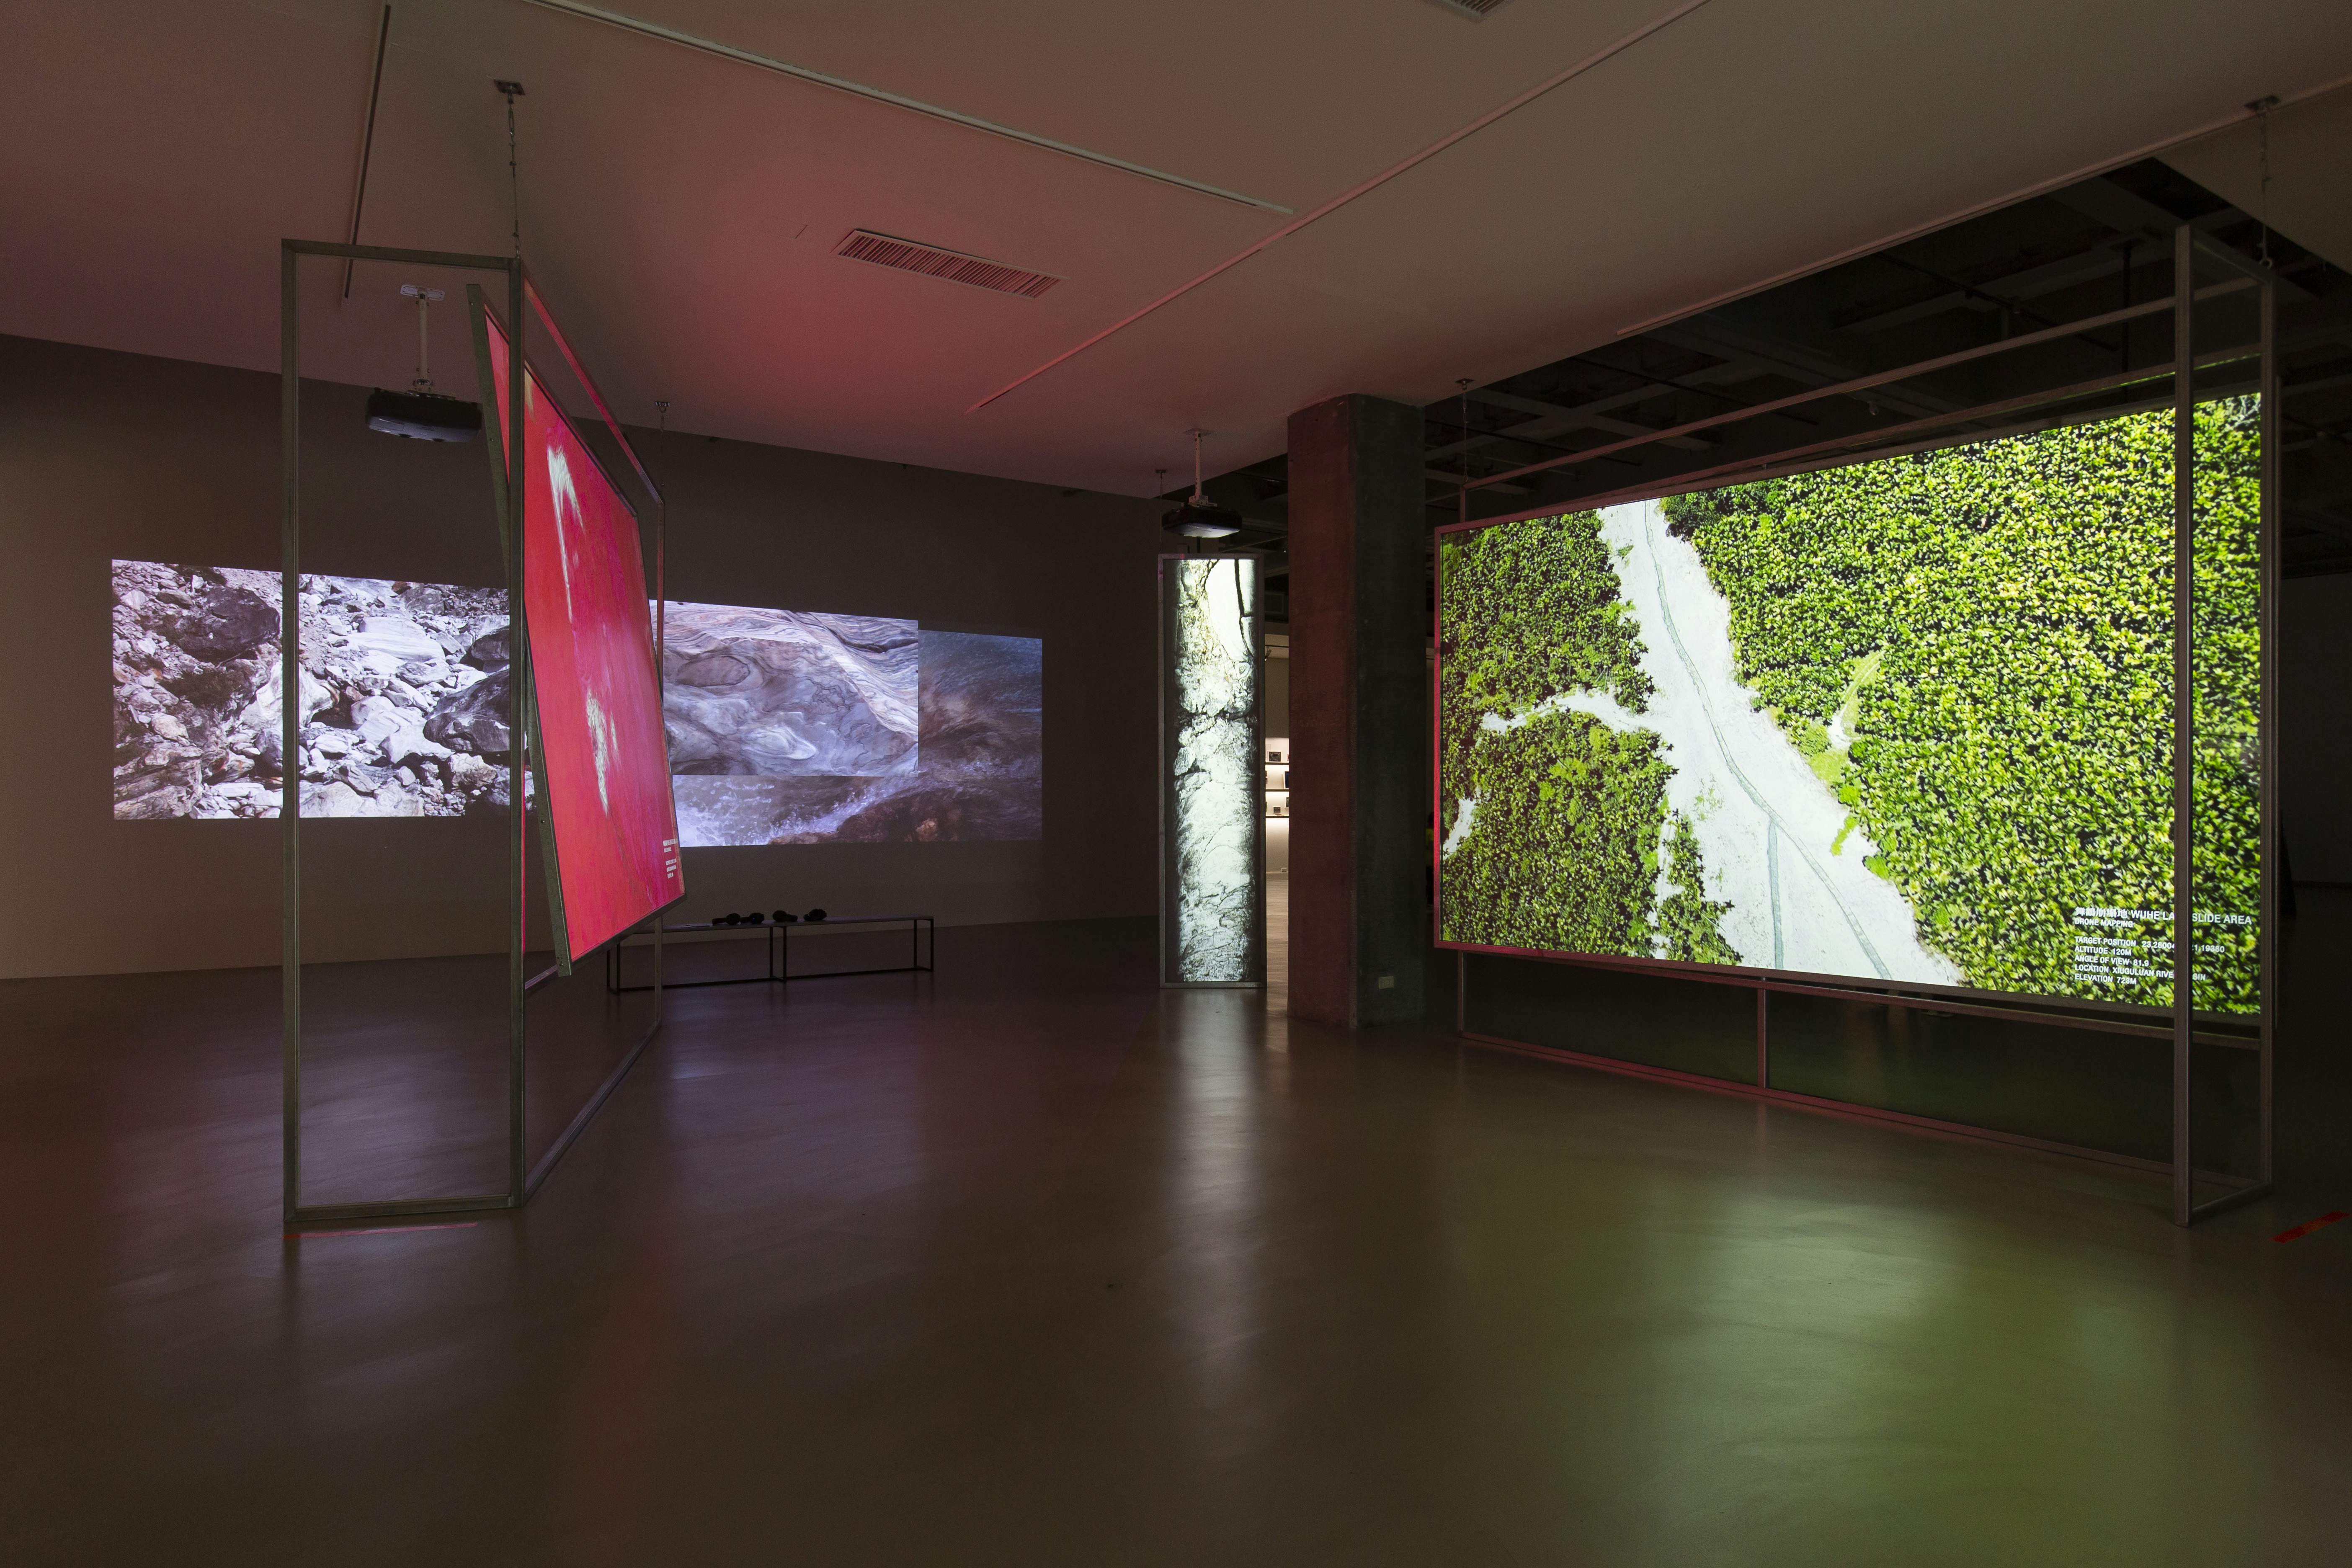 Multi-screened video installation showing rock formations and greenery.